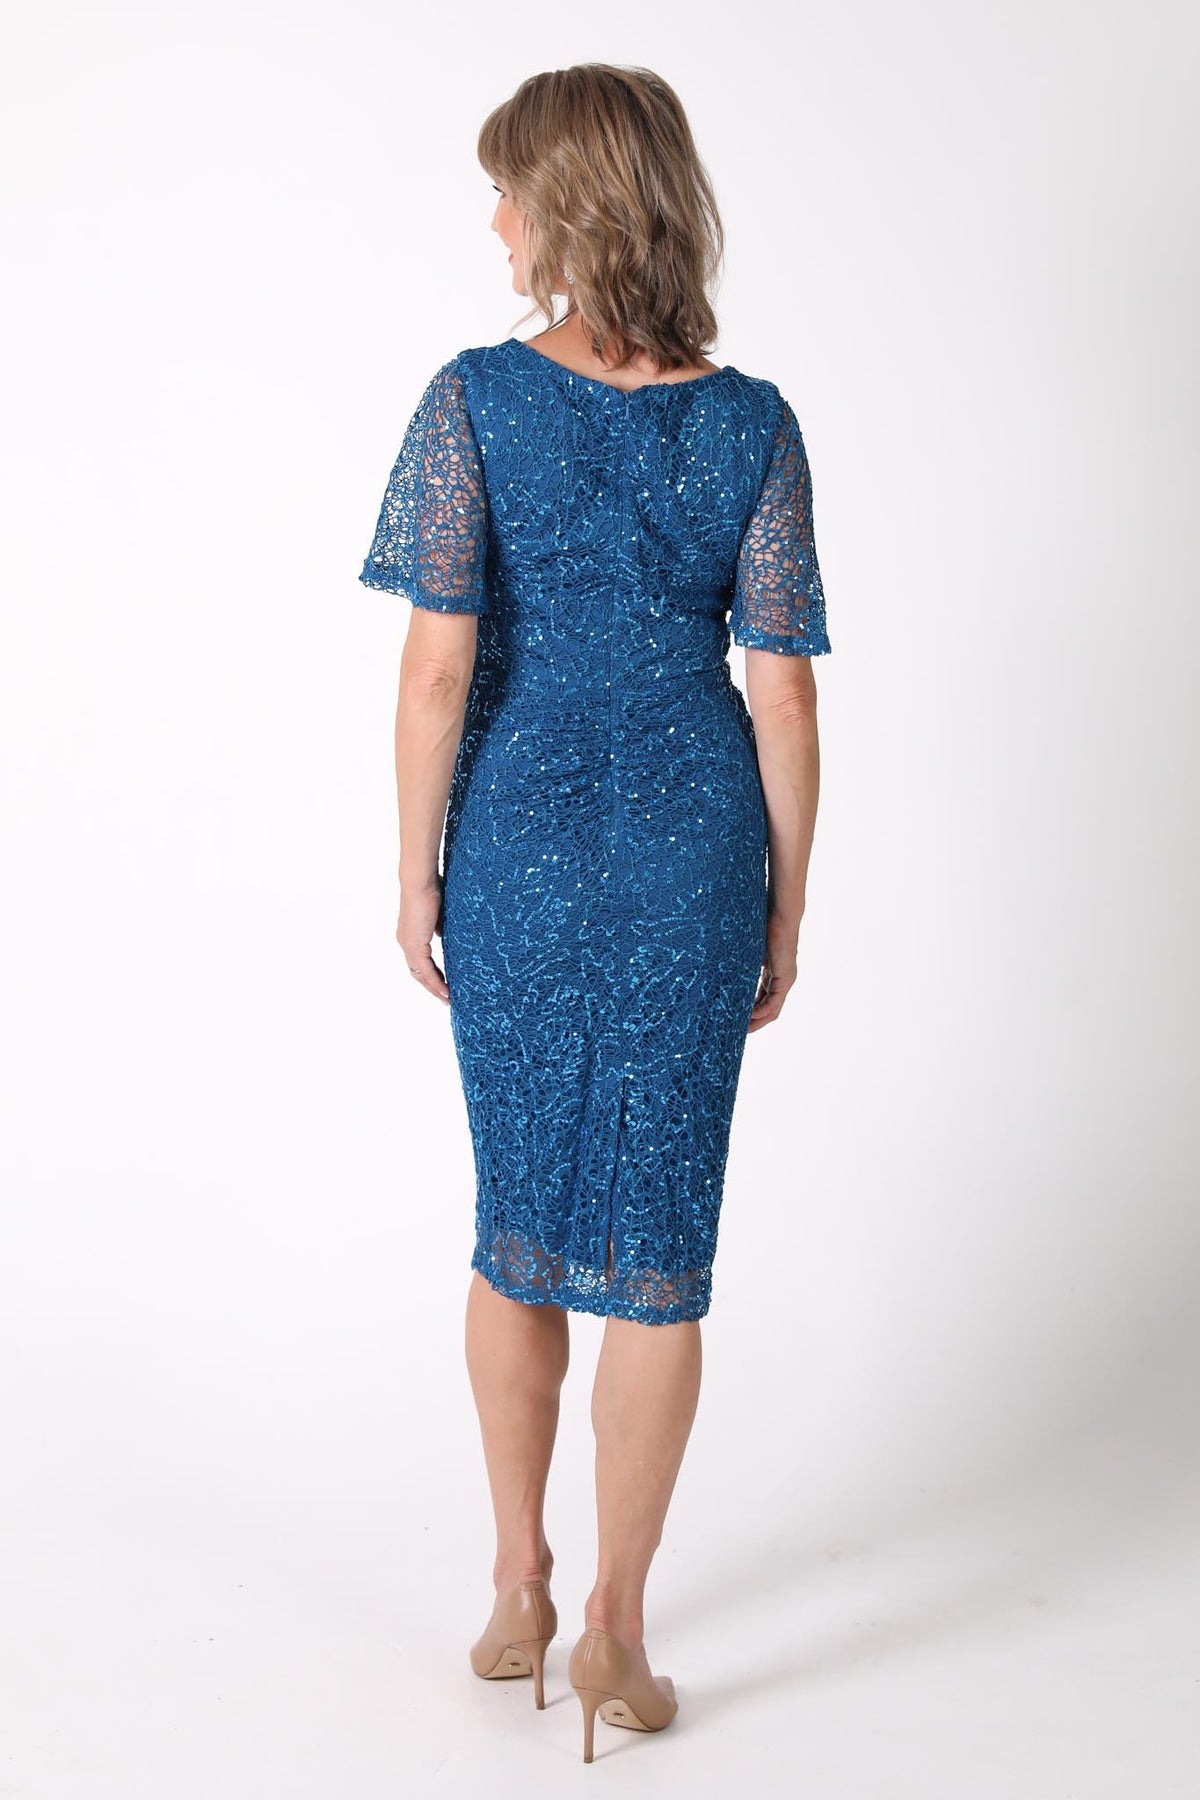 Back image of mature woman sequin cocktail dress with V neckline and butterfly sleeves in teal color